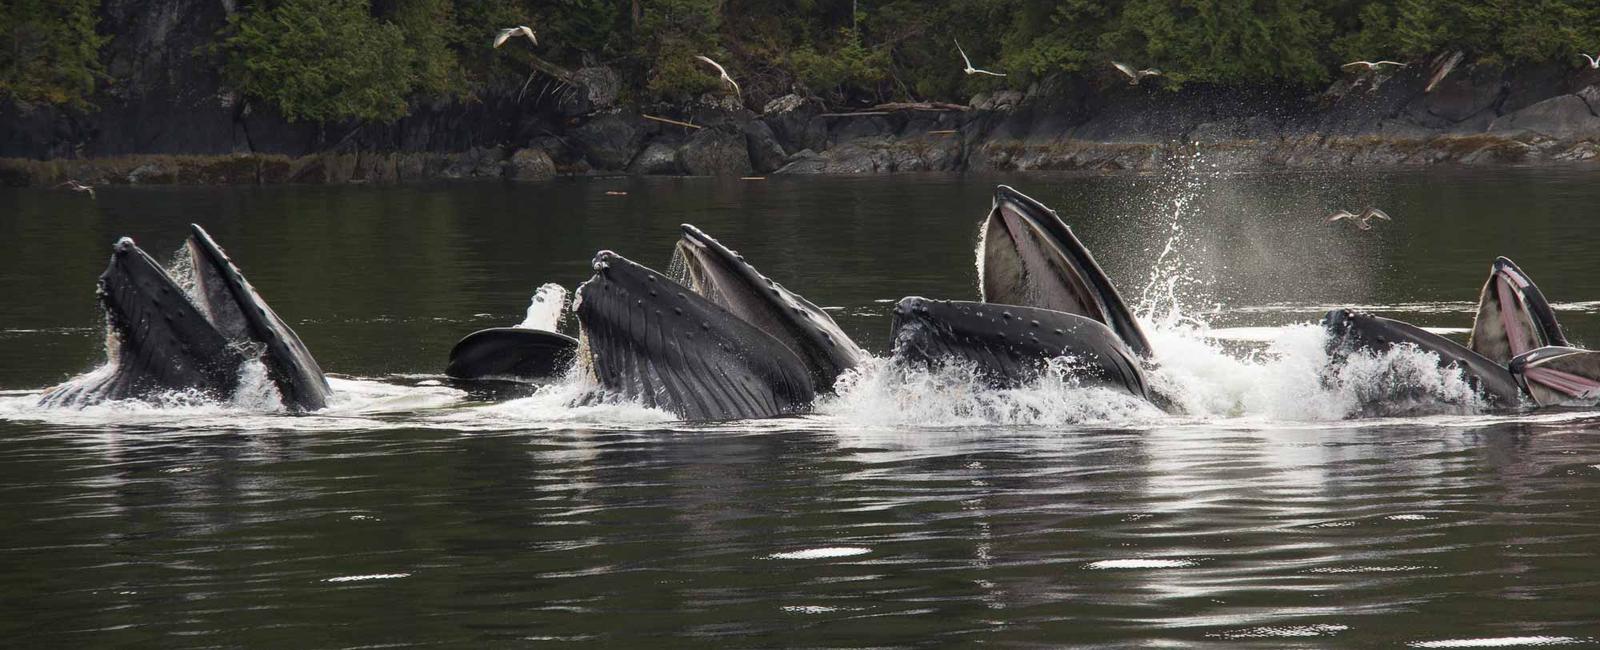 Humpback whales blow a bubble net to herd fish into an area to capture their prey all at once it s more effective to catch and eat an entire group of fish than hunt them one by one